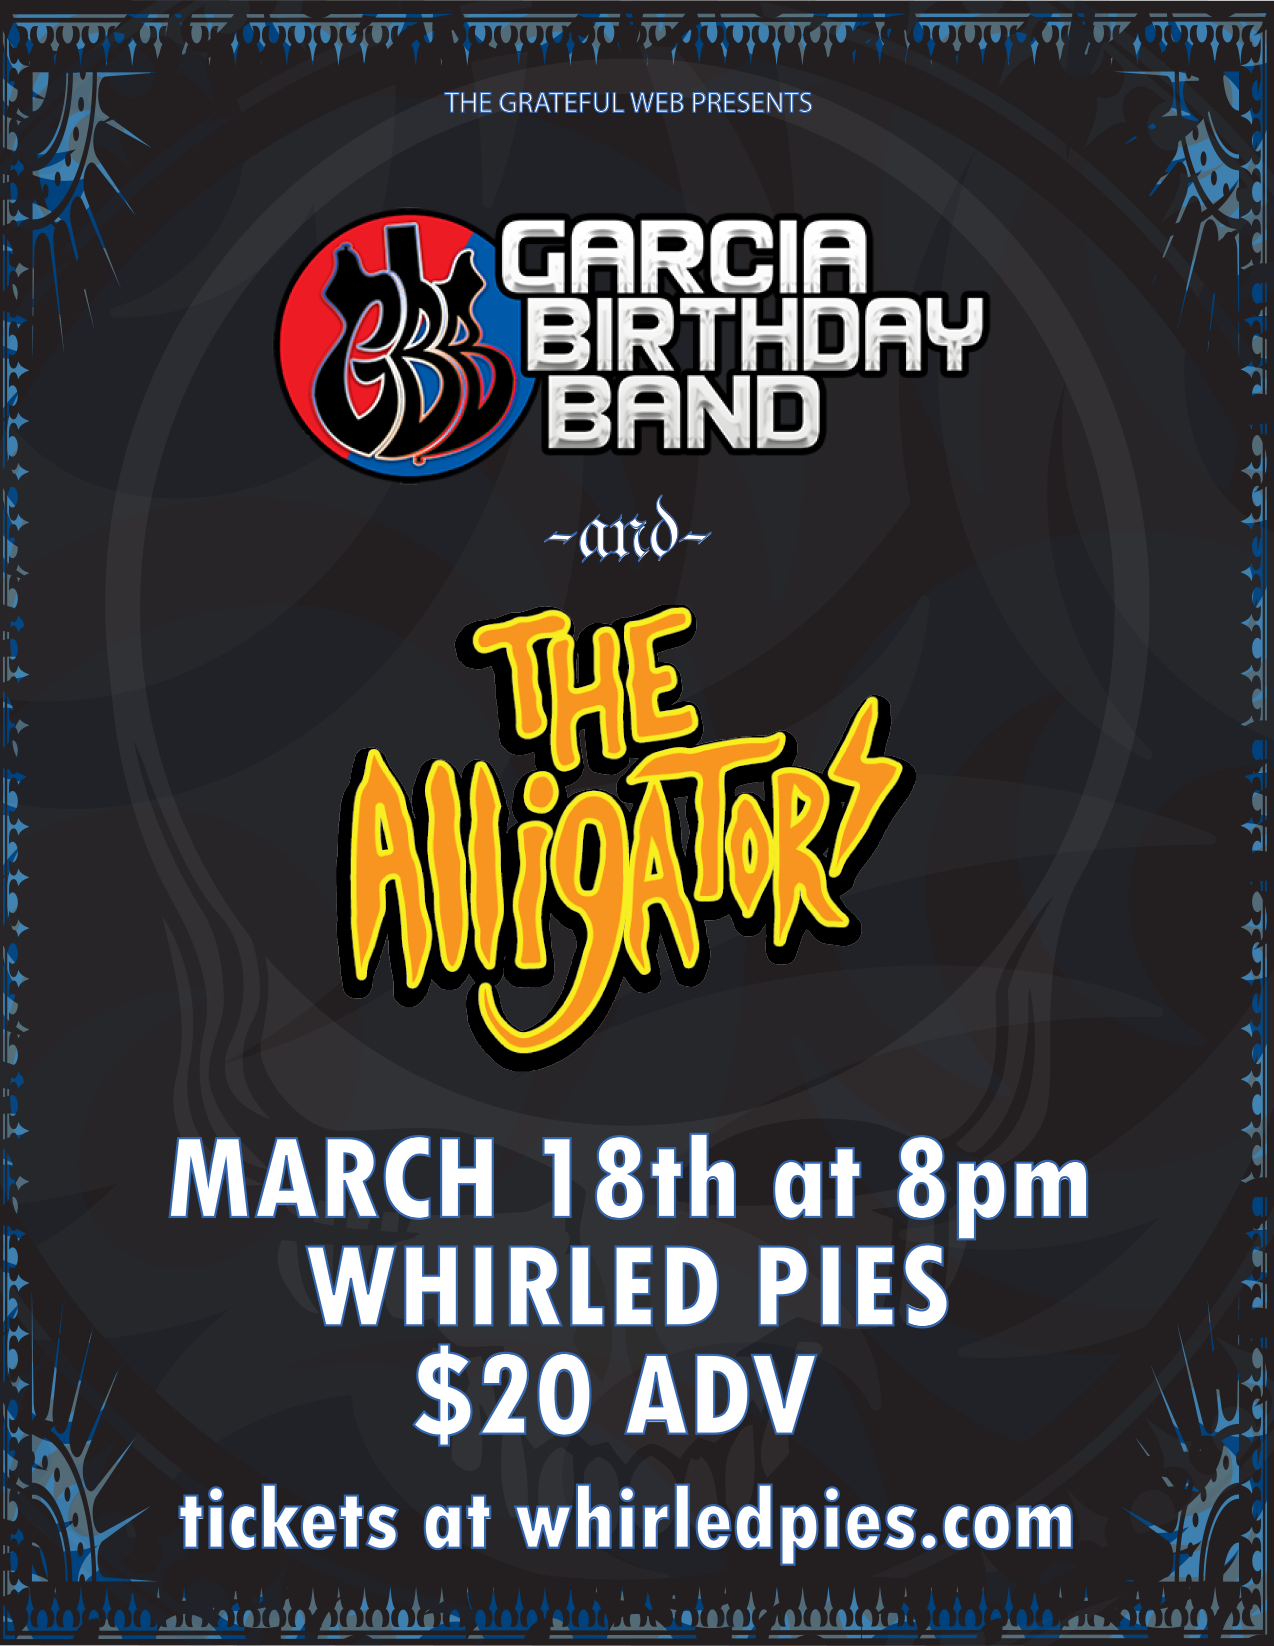 Garcia Birthday Band & The Alligators at Whirled Pies - March 18th 2023